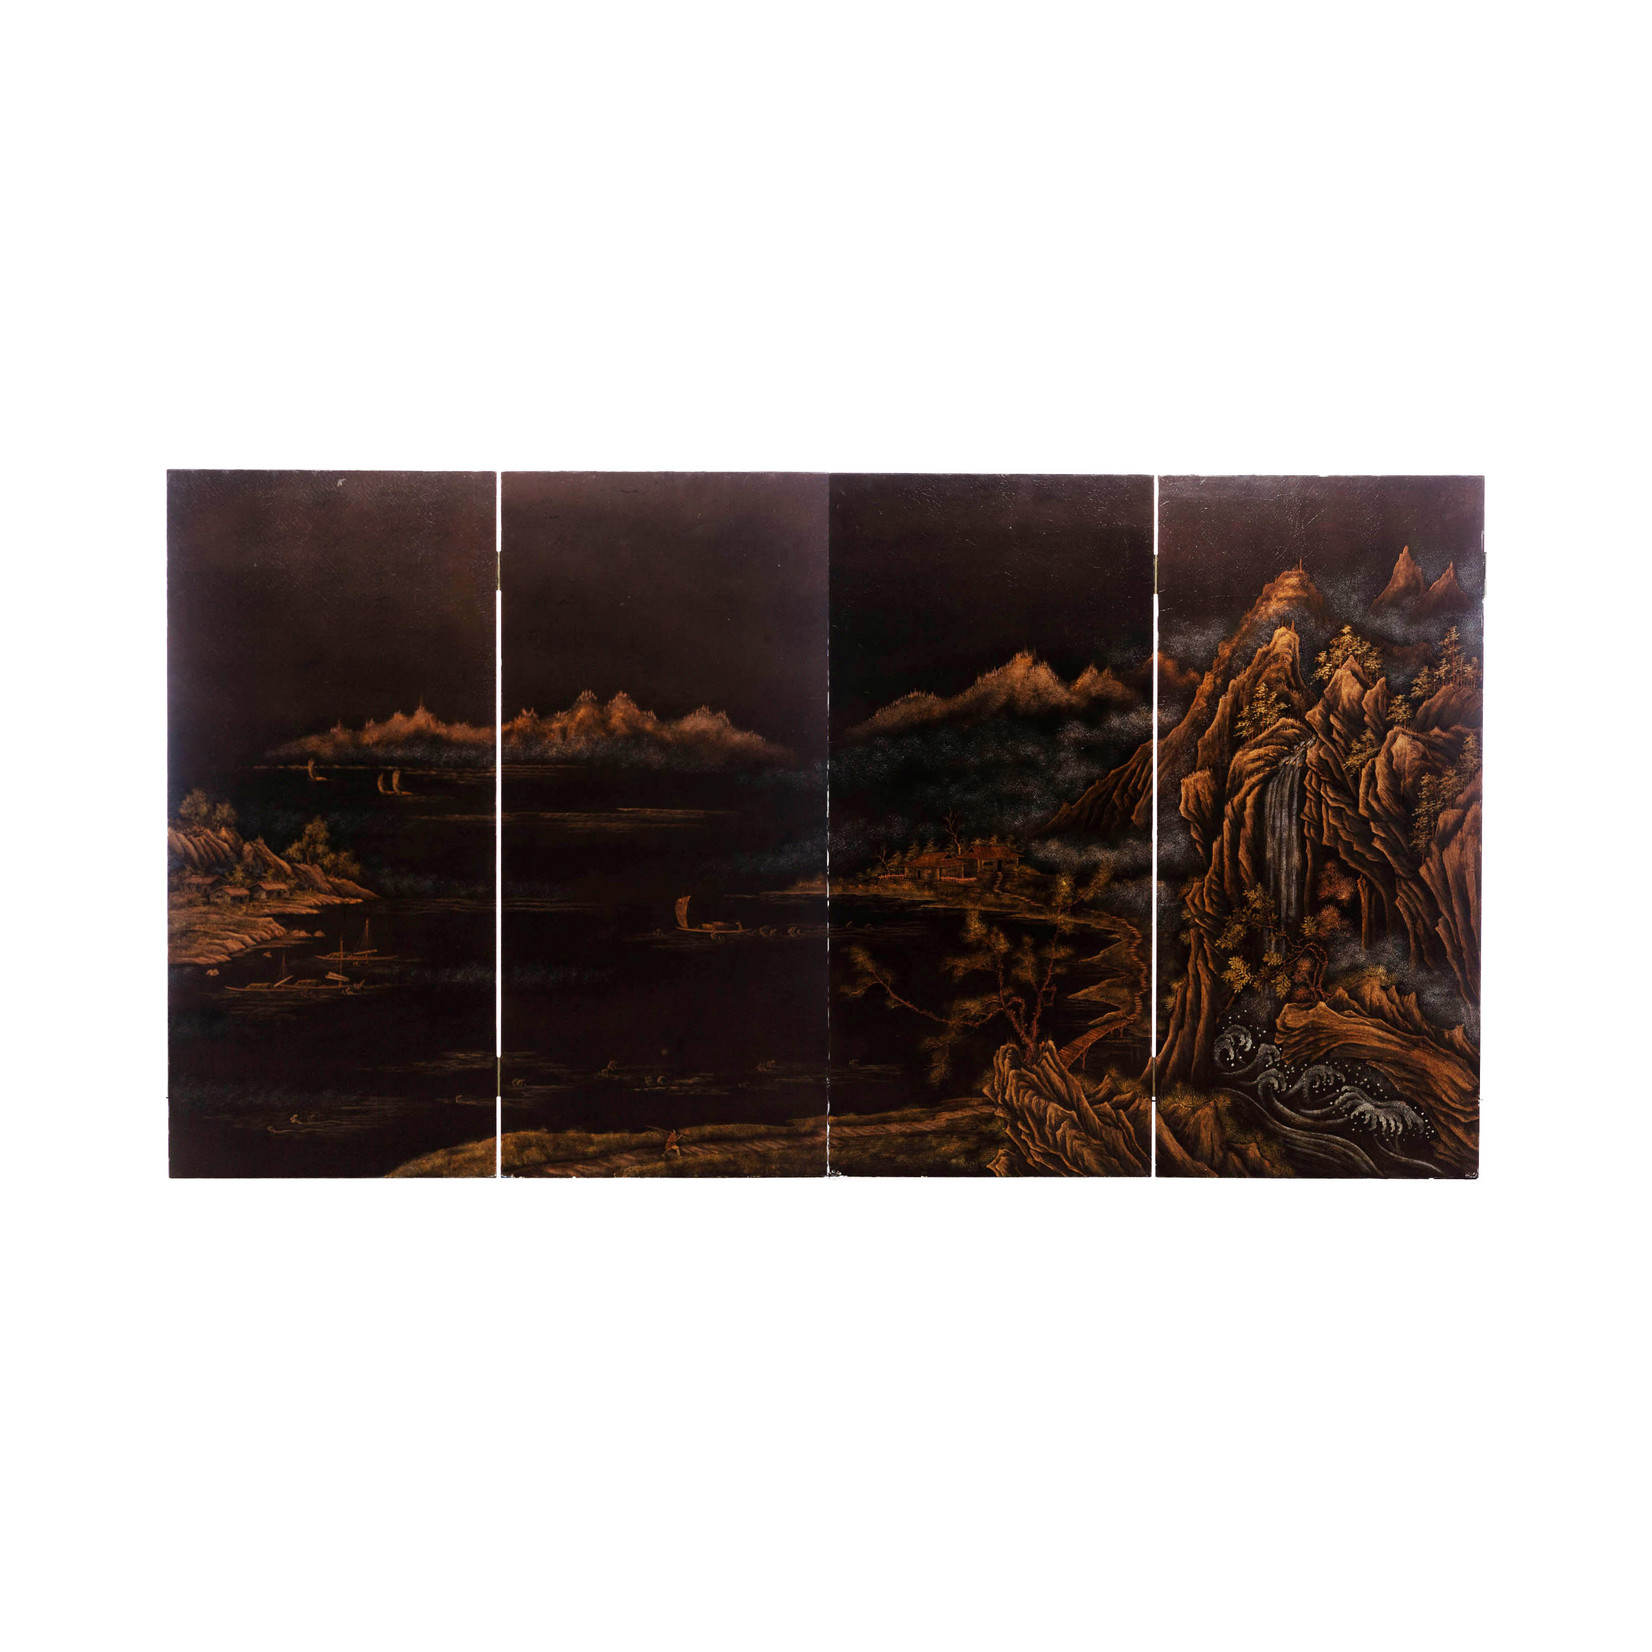 Lawrence & Scott "City of Guilin" Leather on Wood 4-Panel Screen/Room Divider